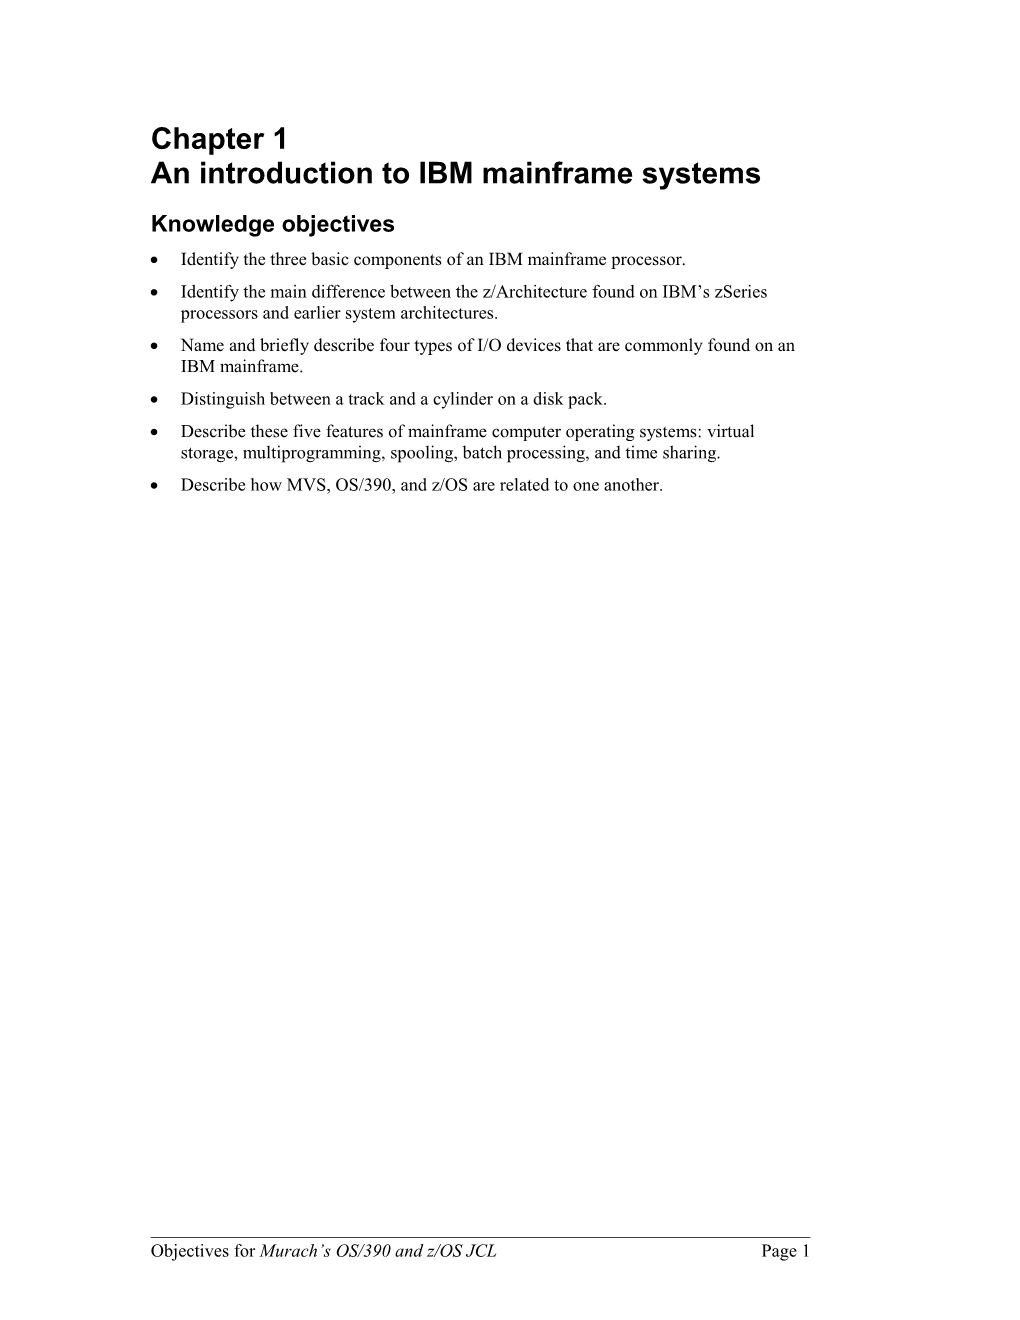 Chapter 1 an Introduction to IBM Mainframe Systems